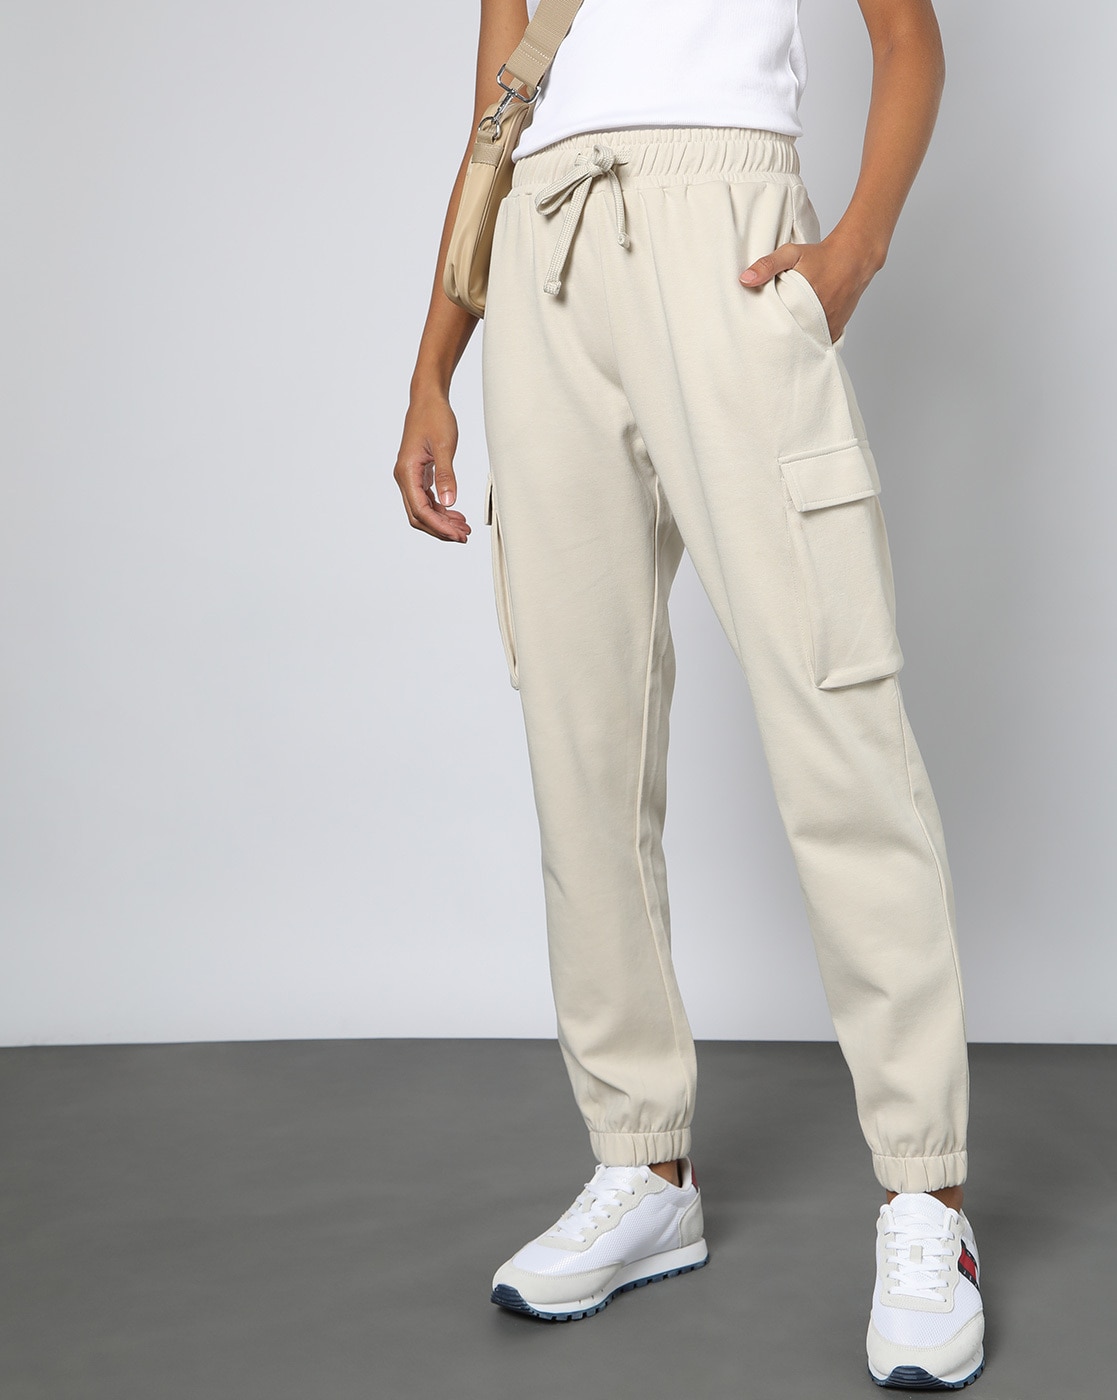 Women Jogger Pants with Utility Pockets